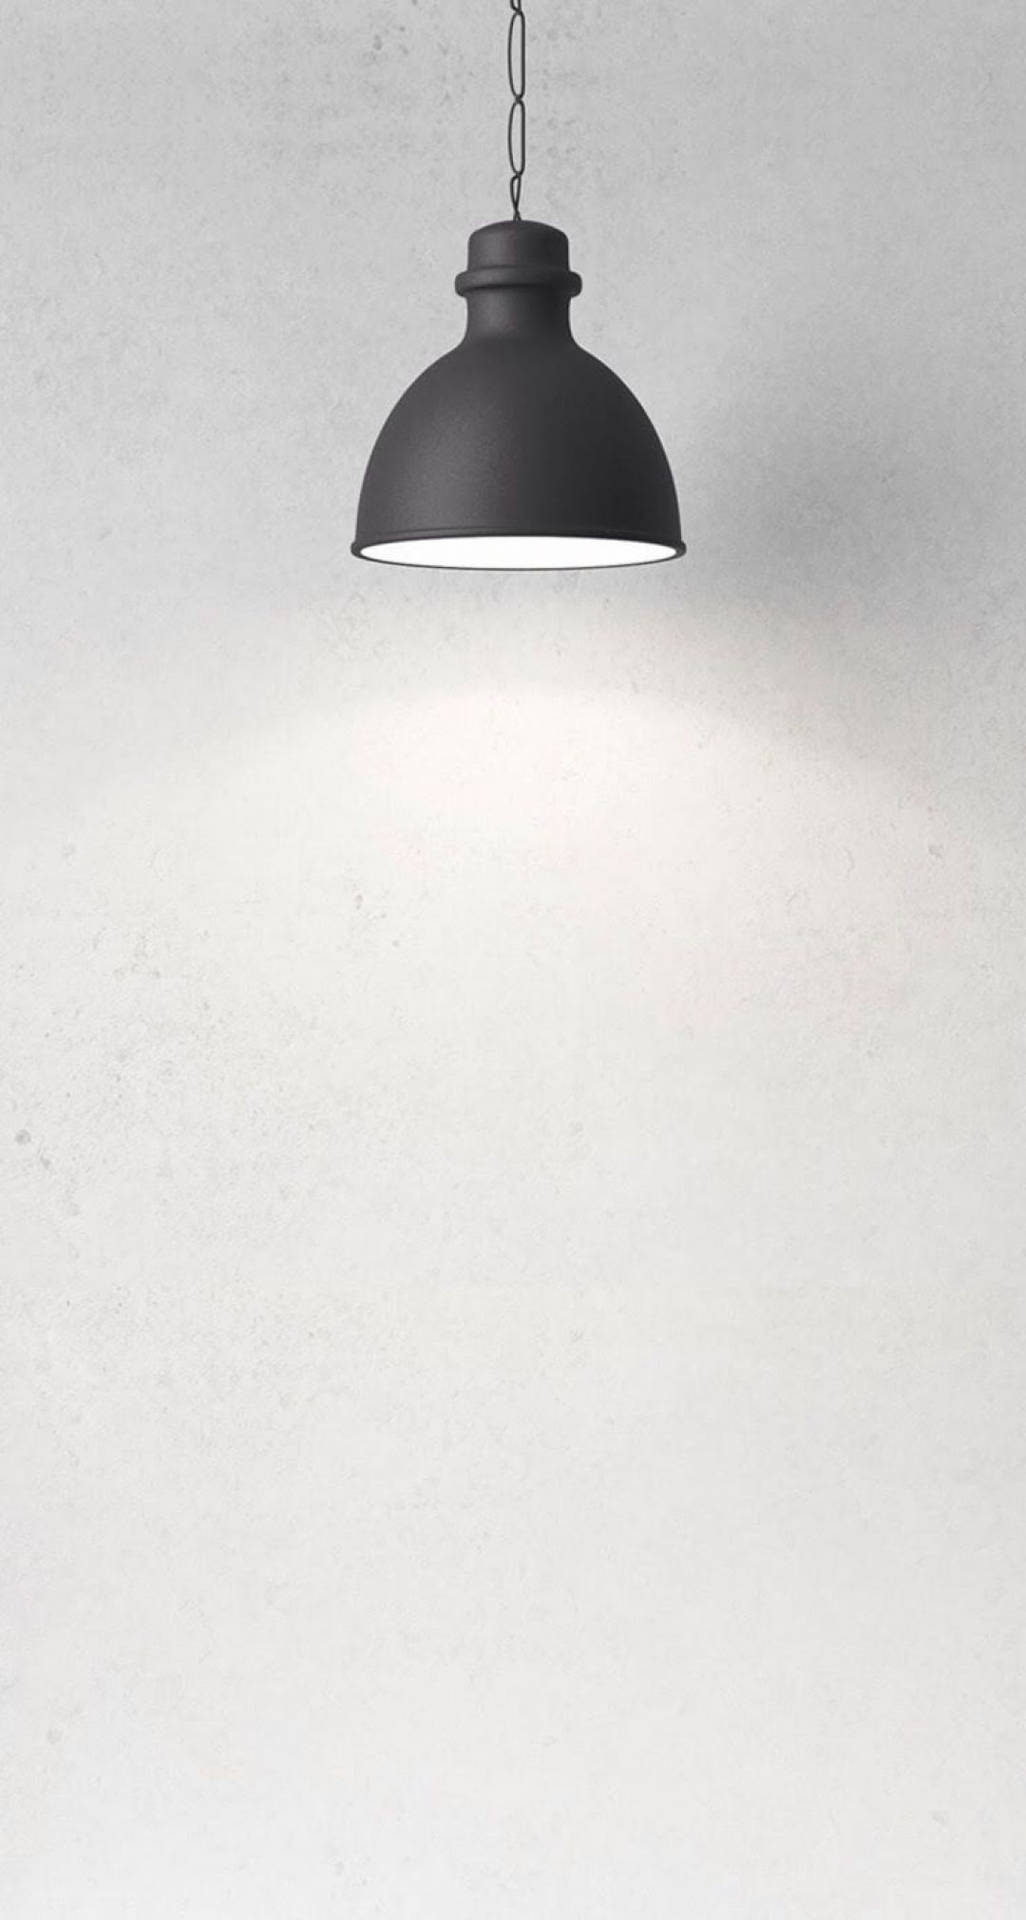 Cool Iphone White Ceiling Lamp Wallpaper